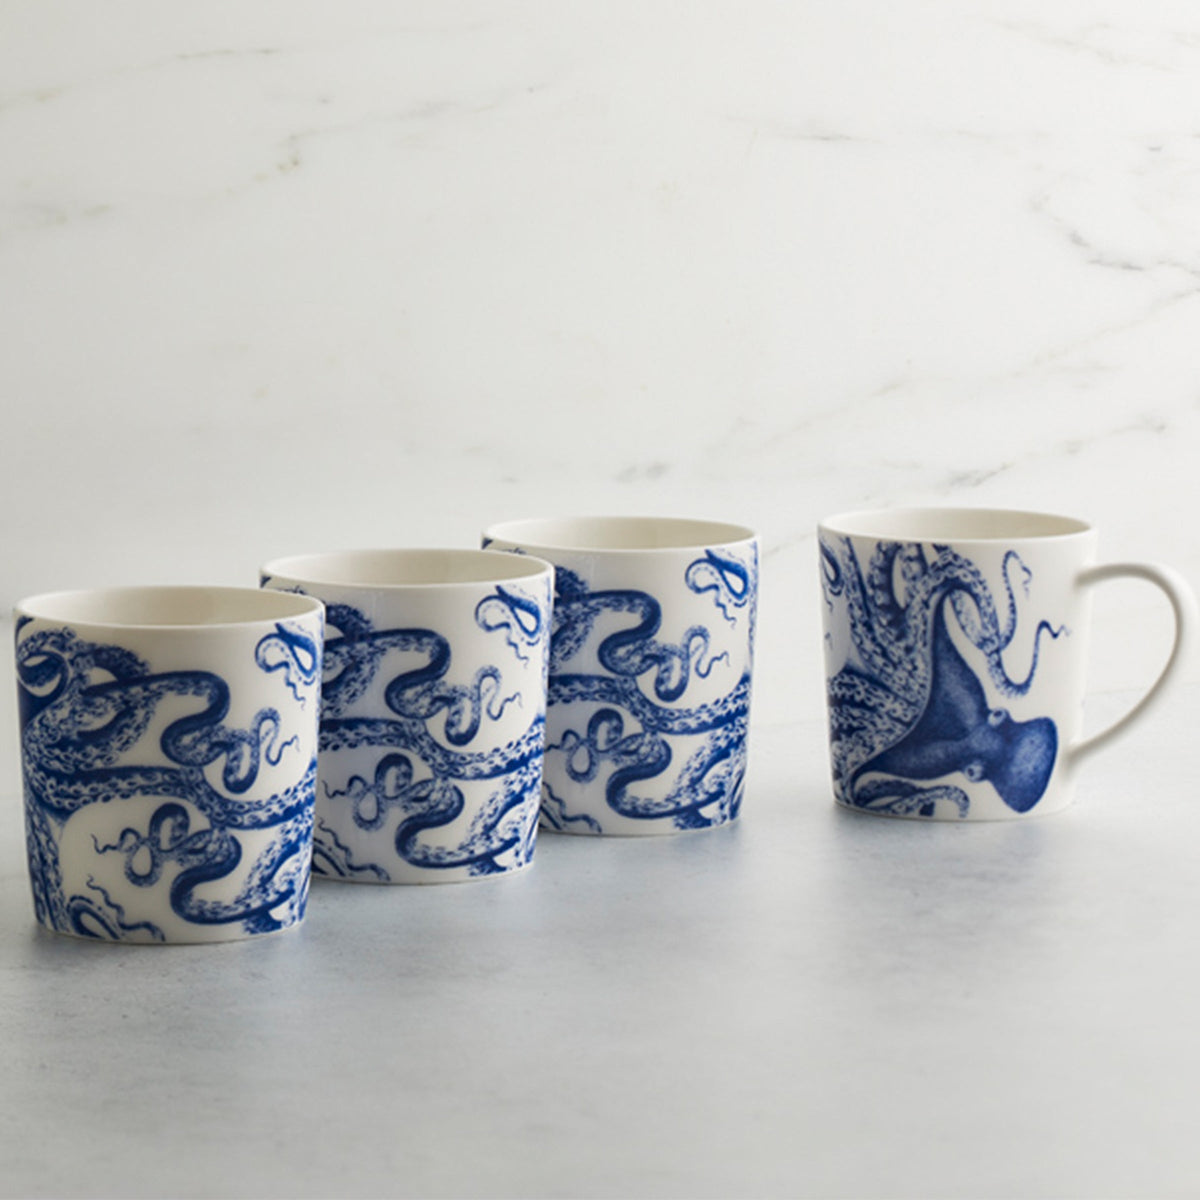 Four premium Caskata Artisanal Home Lucy Mugs with blue octopus designs arranged in a row on a light surface against a white background, both dishwasher and microwave safe.